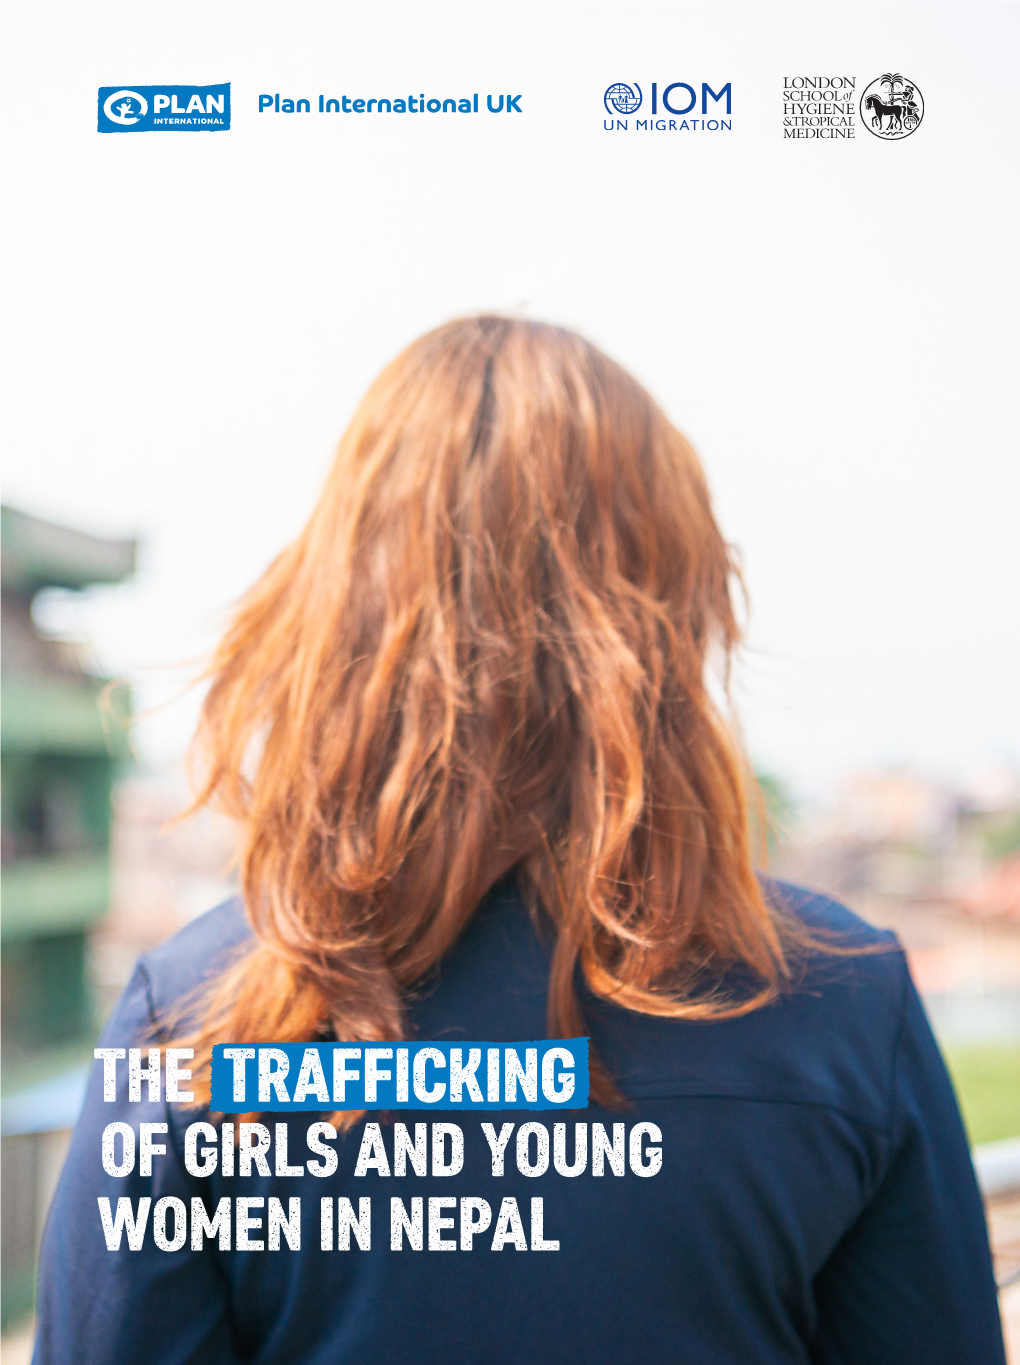 The Trafficking of Girls and Young Women in Nepal